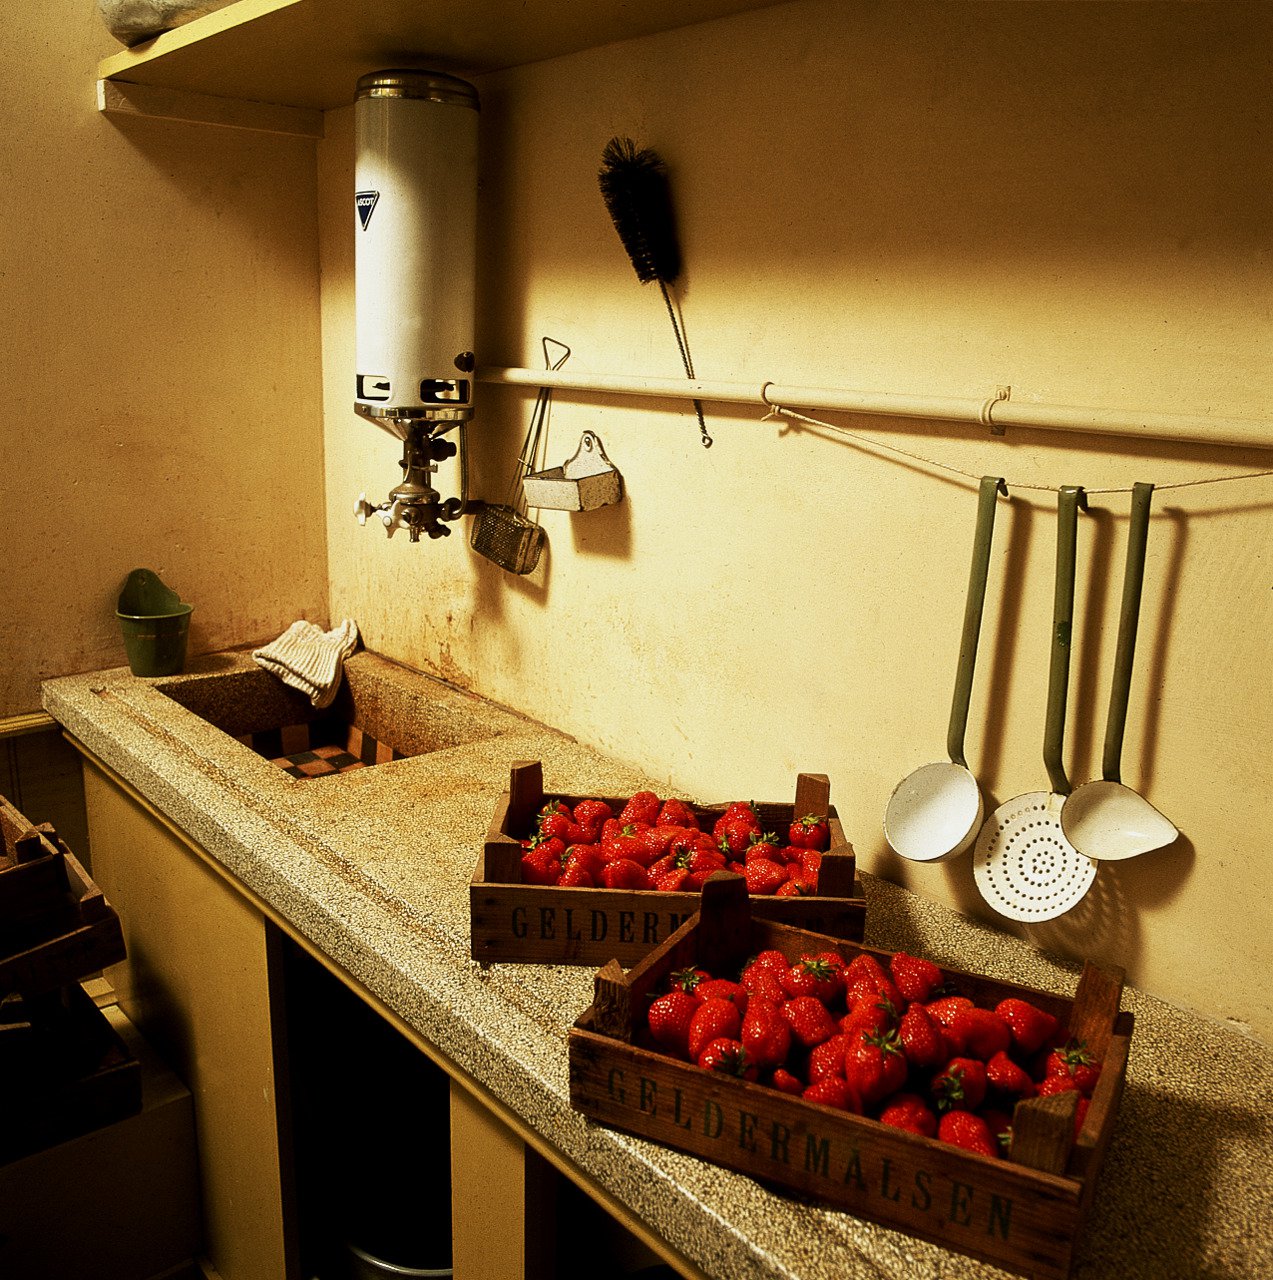 Strawberries on the office kitchen worktop, reconstruction (1999).